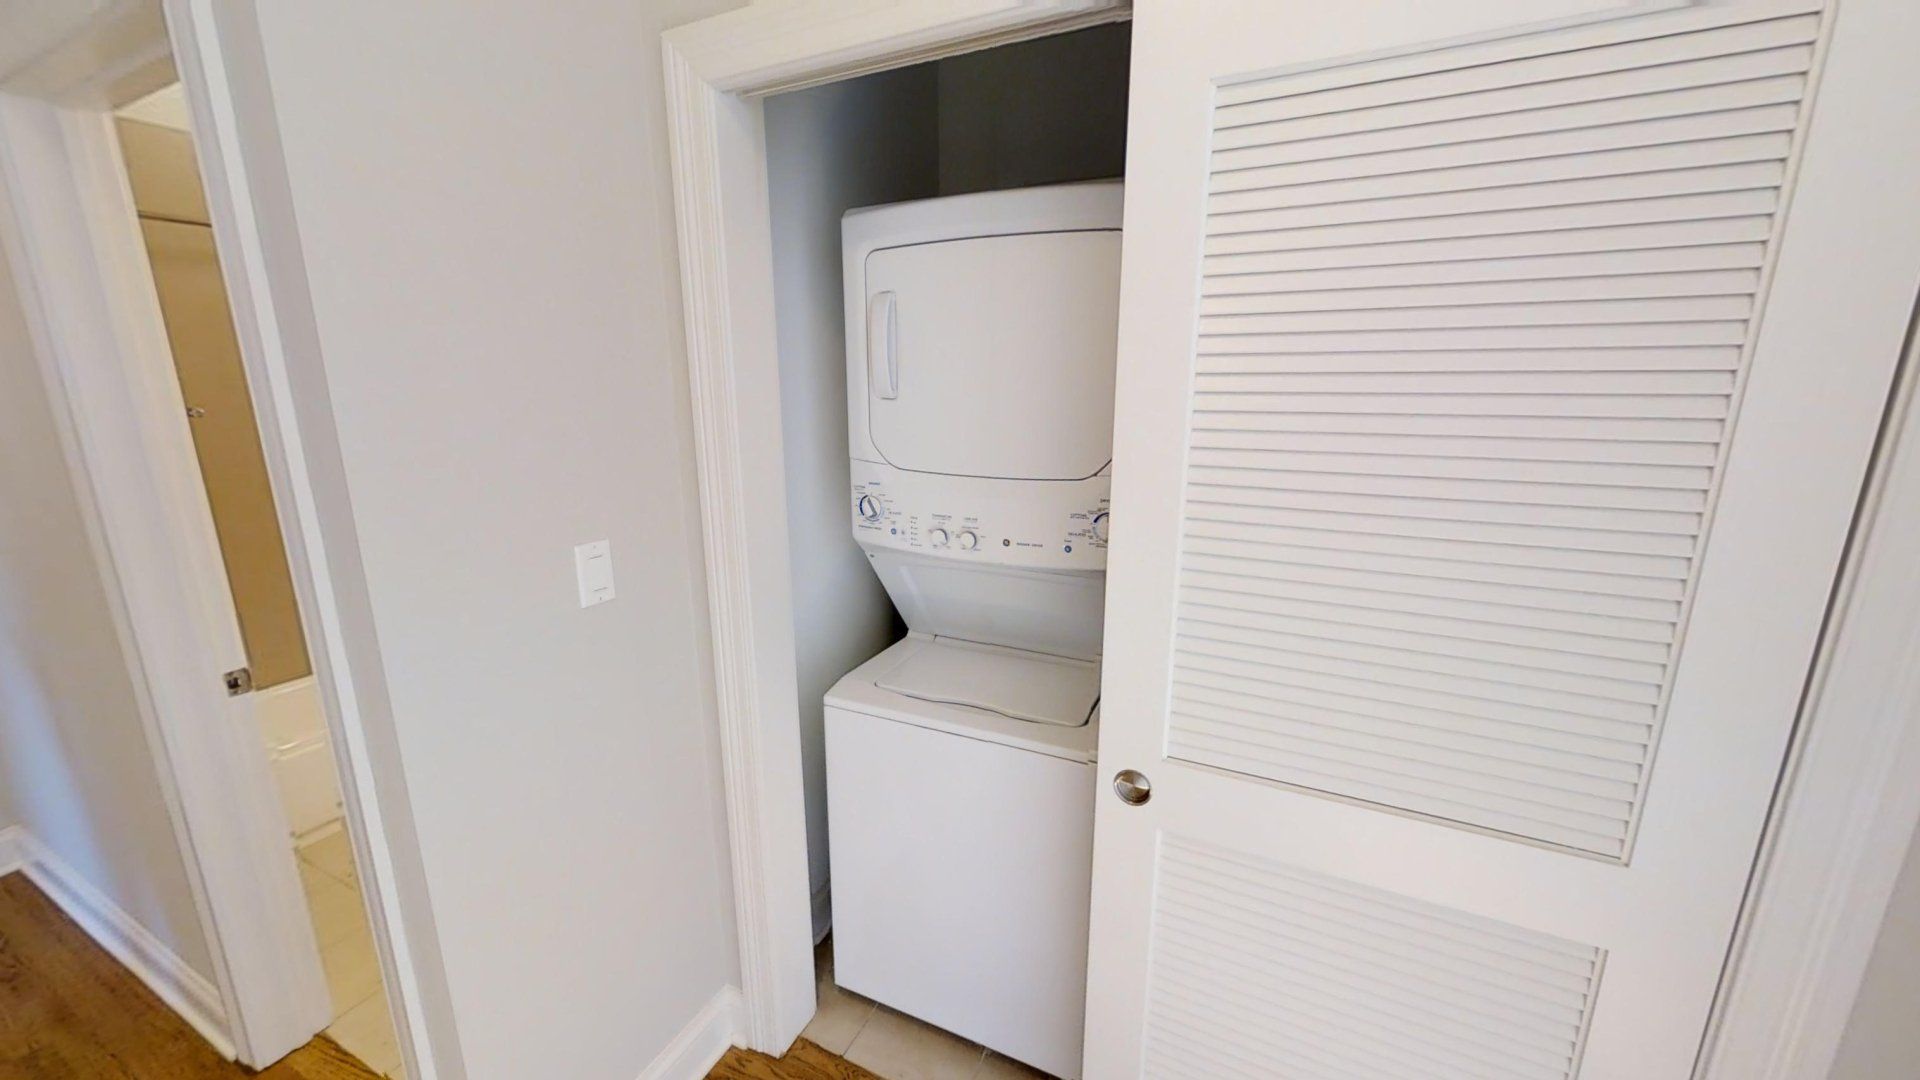 A washer and dryer are stacked in a closet.